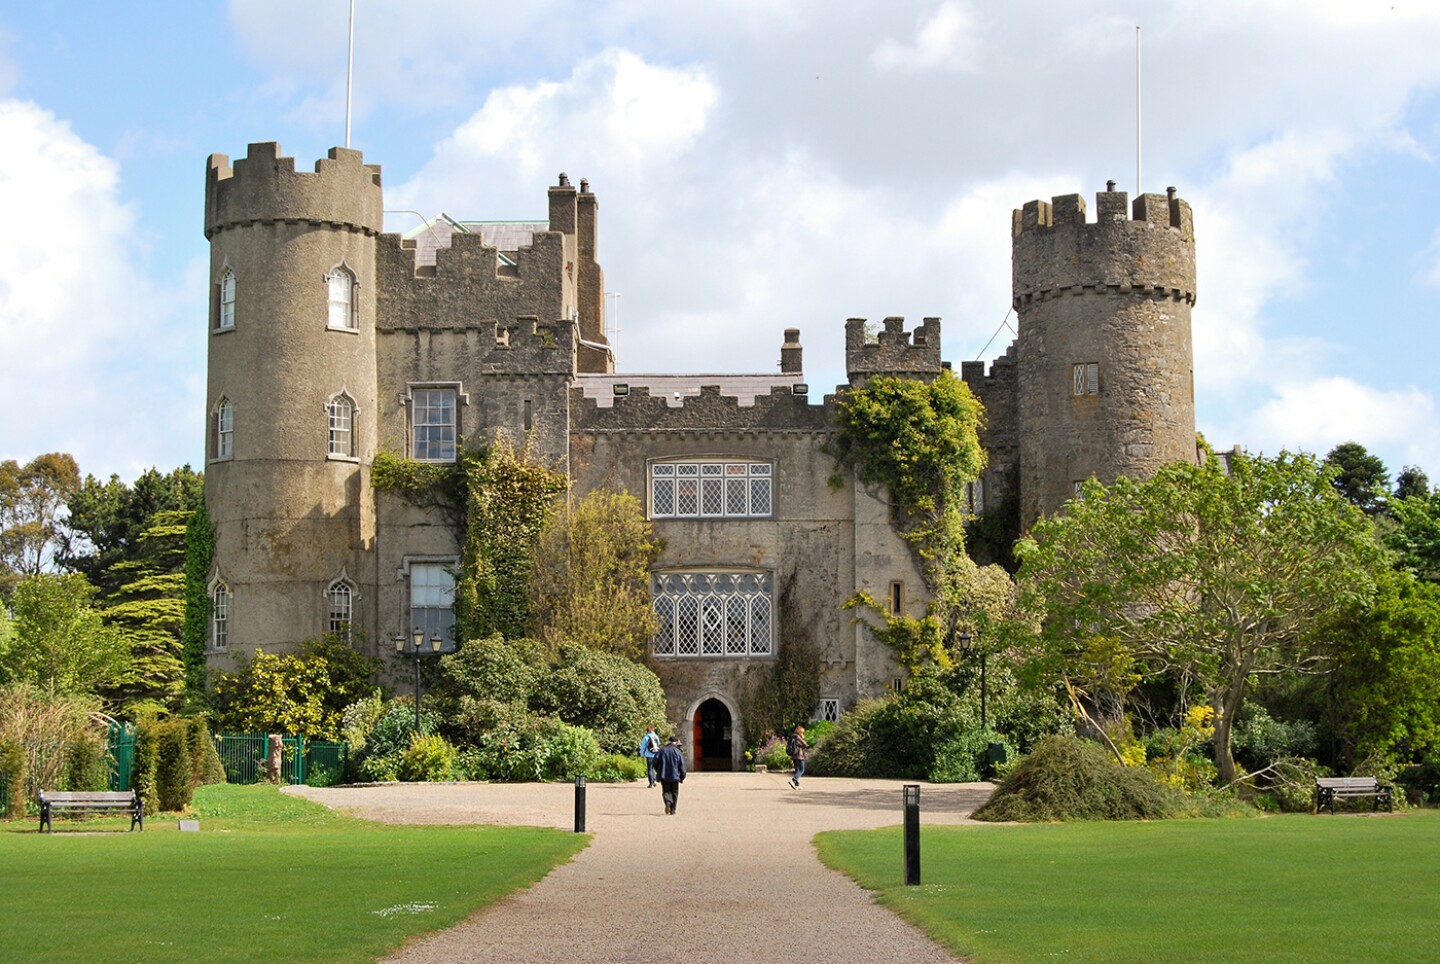 <h2>13. Malahide Castle</h2> <p><i>Malahide, Ireland</i></p> <p><a class="Link" href="https://www.malahidecastleandgardens.ie/castle/" rel="noopener">Malahide Castle</a> on the outskirts of Dublin was in the same family, the Talbots, for nearly 800 years. (It’s now owned by a local tourism company.) Initial construction began in the 12th century with many expansions throughout its history—including a seamless addition of two towers in 1765; the three-story main tower is original. Inside, the richly appointed rooms are decorated in a range of period styles; most impressive is the Gothic Great Hall, featuring soaring vaulted ceilings and walls lined with stern-faced portraits of Talbot descendants. The storybook setting, on 260 acres of parkland, features 5,000 plant varieties and a butterfly house. Guided tours of the castle (required for entry) take place daily.</p> <h3>How to visit Malahide Castle</h3> <p>The castle is a 25-minute drive from Dublin’s city center (there are also train and bus connections) or 10 minutes from Dublin airport.</p>